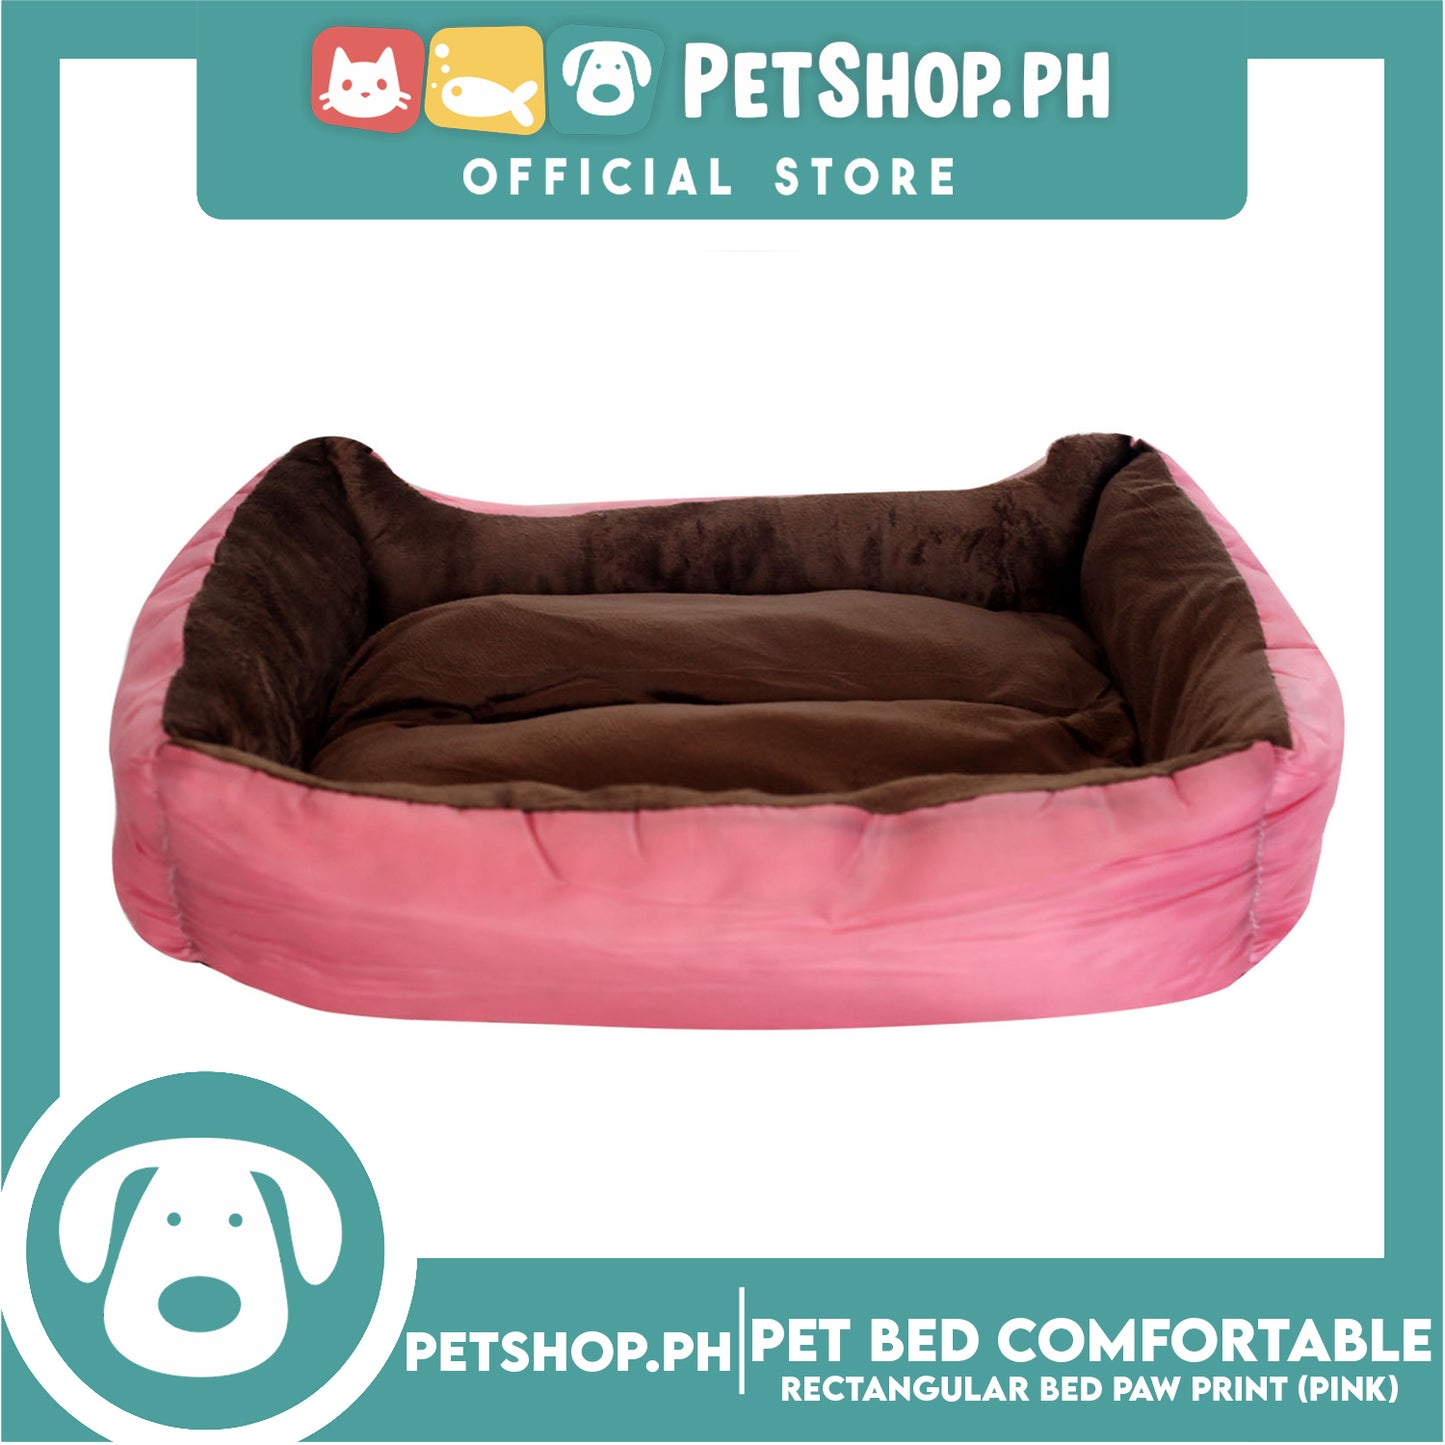 Pet Bed Comfortable Rectangular Pet Bed with Paw Print 72x58x10cm Large for Dogs & Cats (Pink)